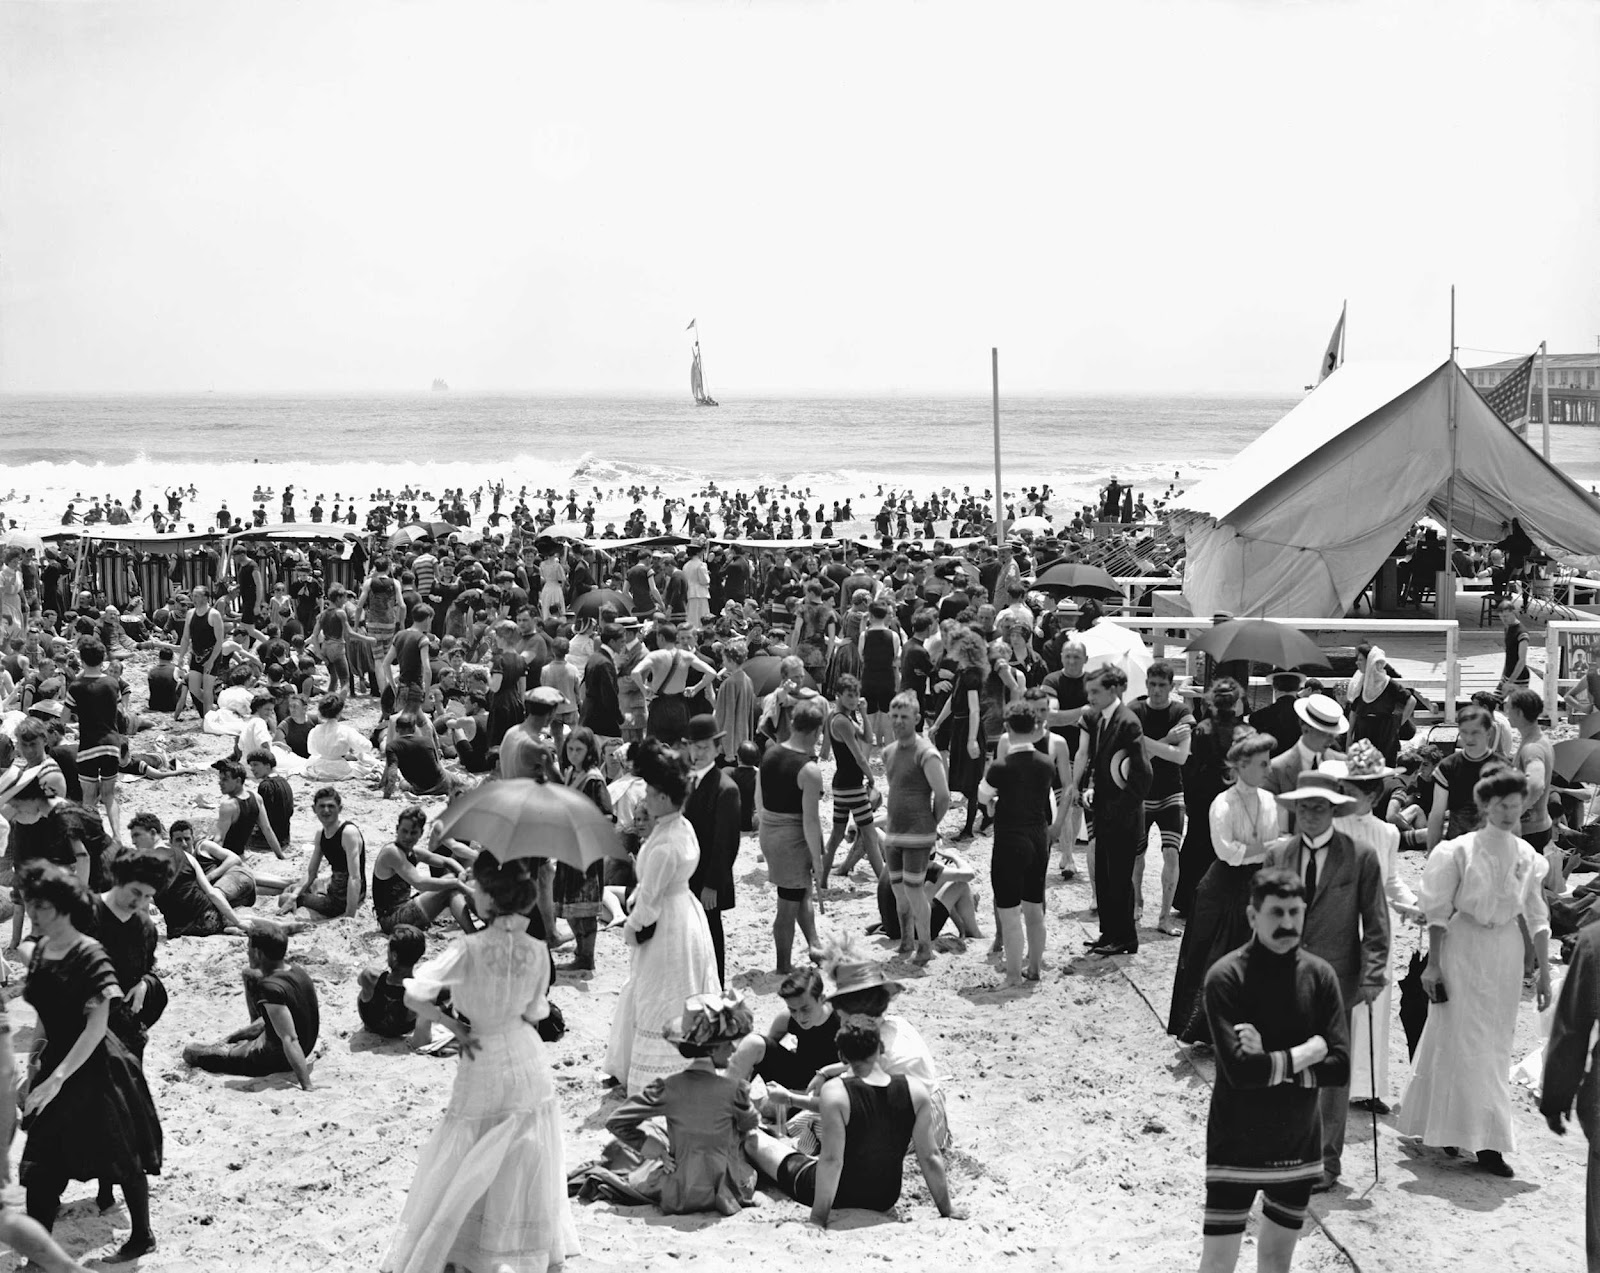 20 Vintage Pictures of Atlantic City Beach in the 1900s 